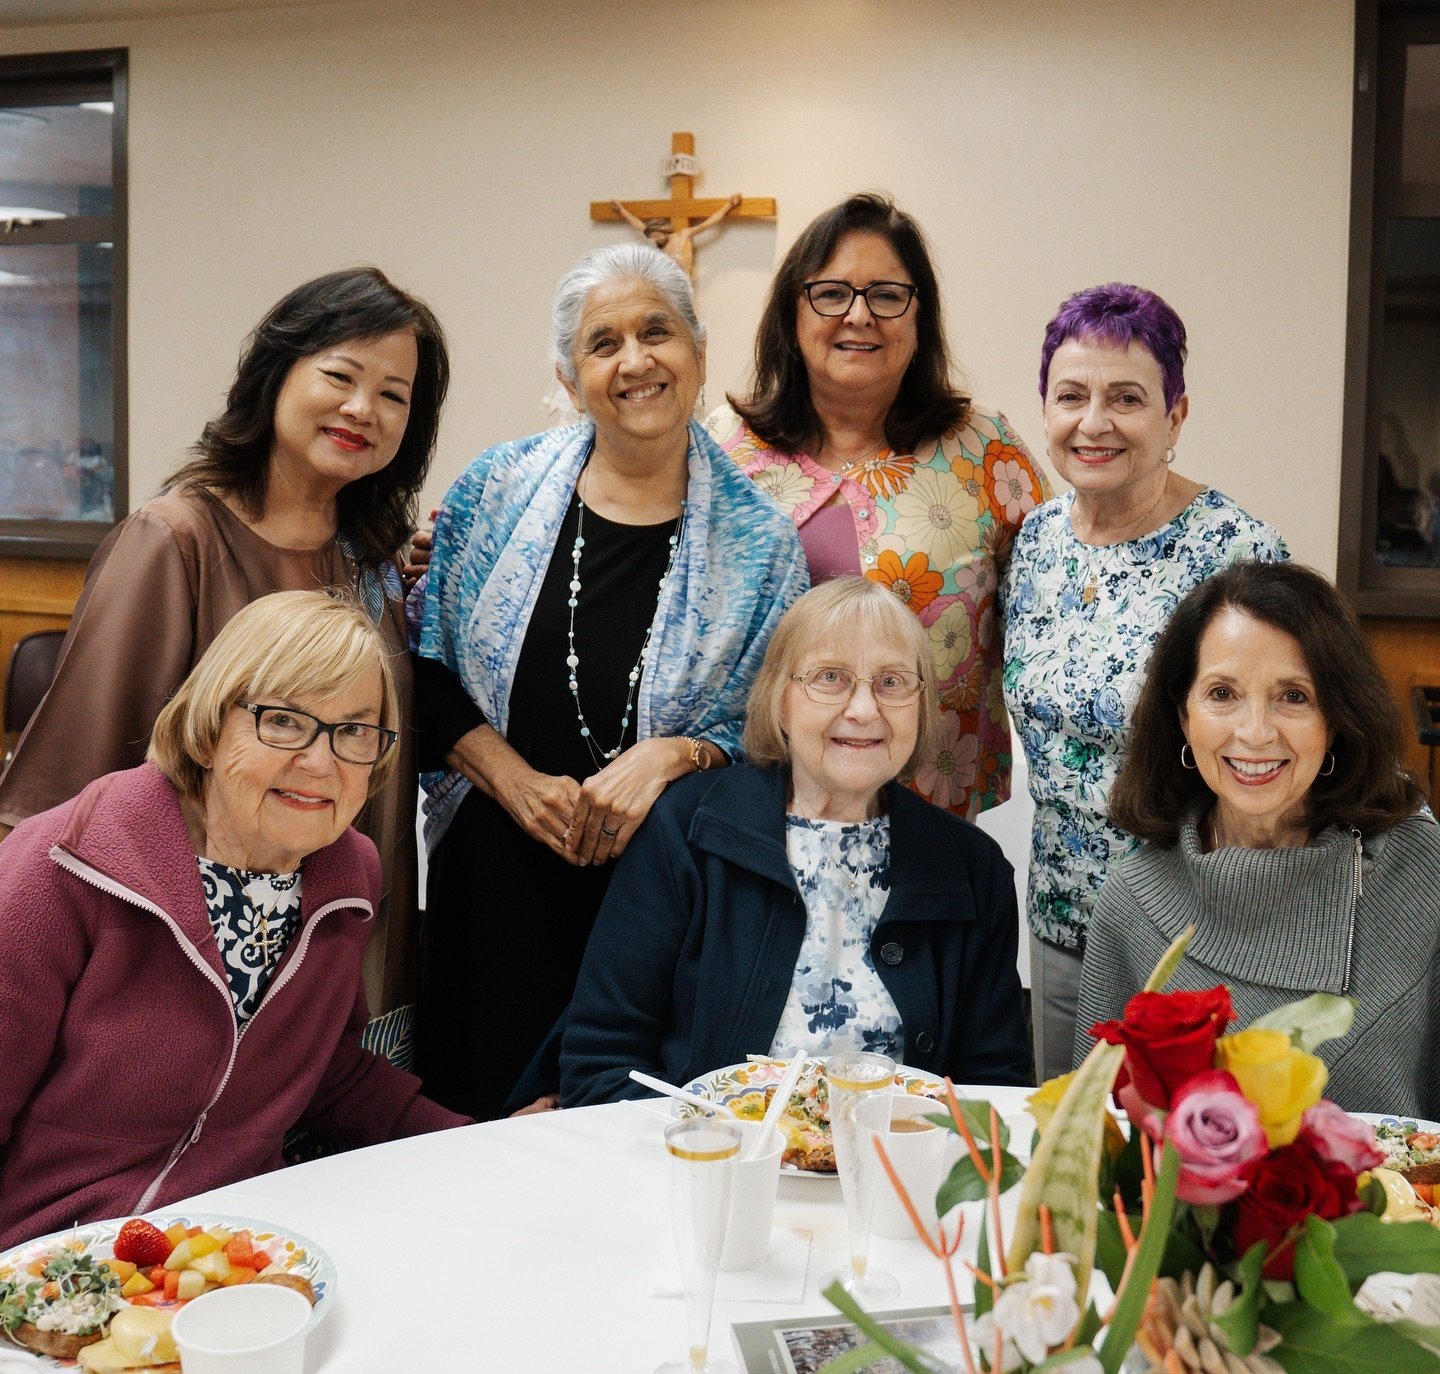 Our Free To Be Women&rsquo;s Group celebrated their last gathering of the season with a delicious brunch provided by our Knights of Columbus! Thank you to everyone who prayed, gathered, and served with us this season 🤍

Are you a woman looking for f